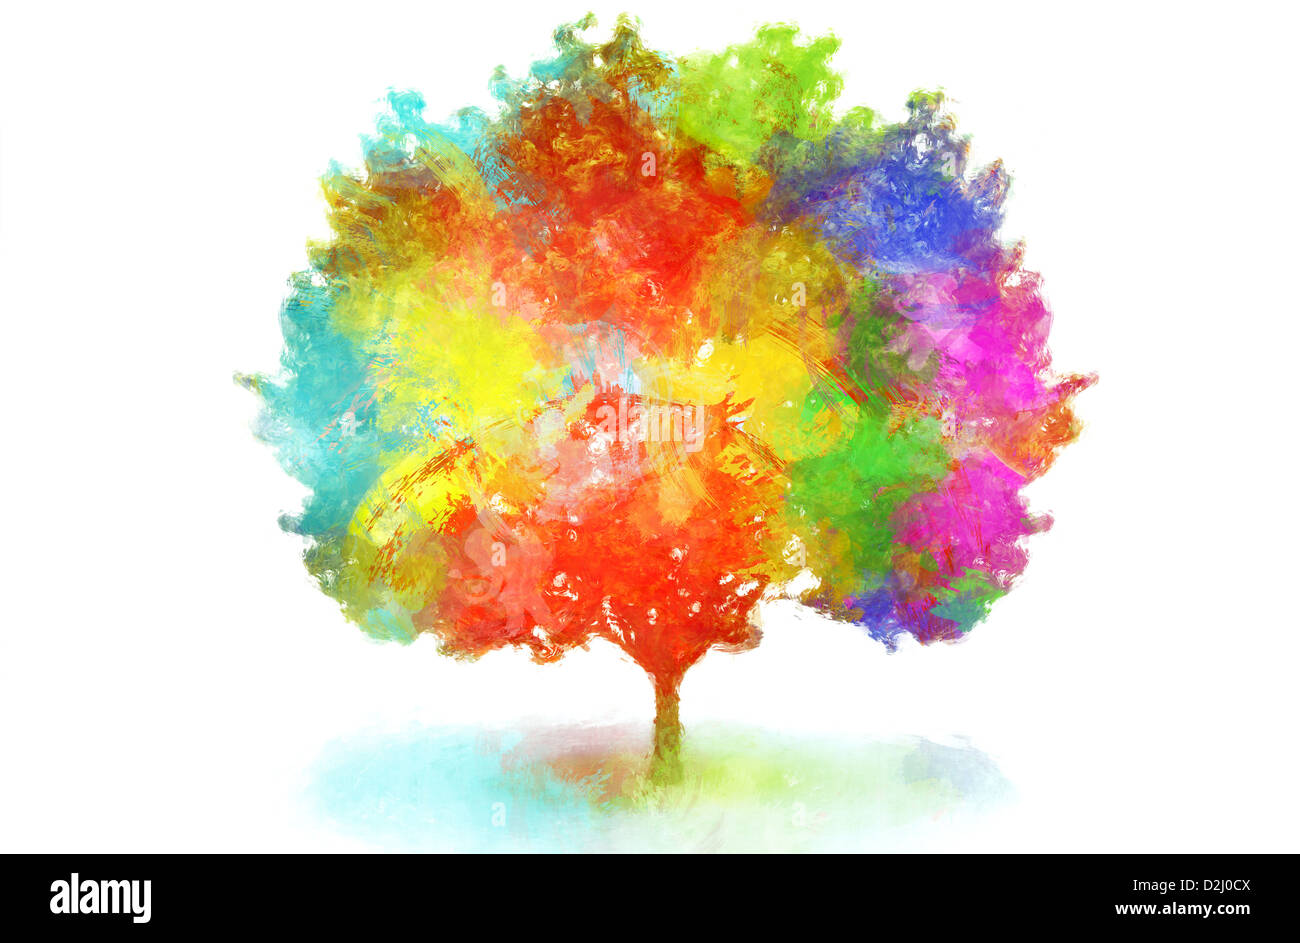 Abstract colorful tree design Banque D'Images